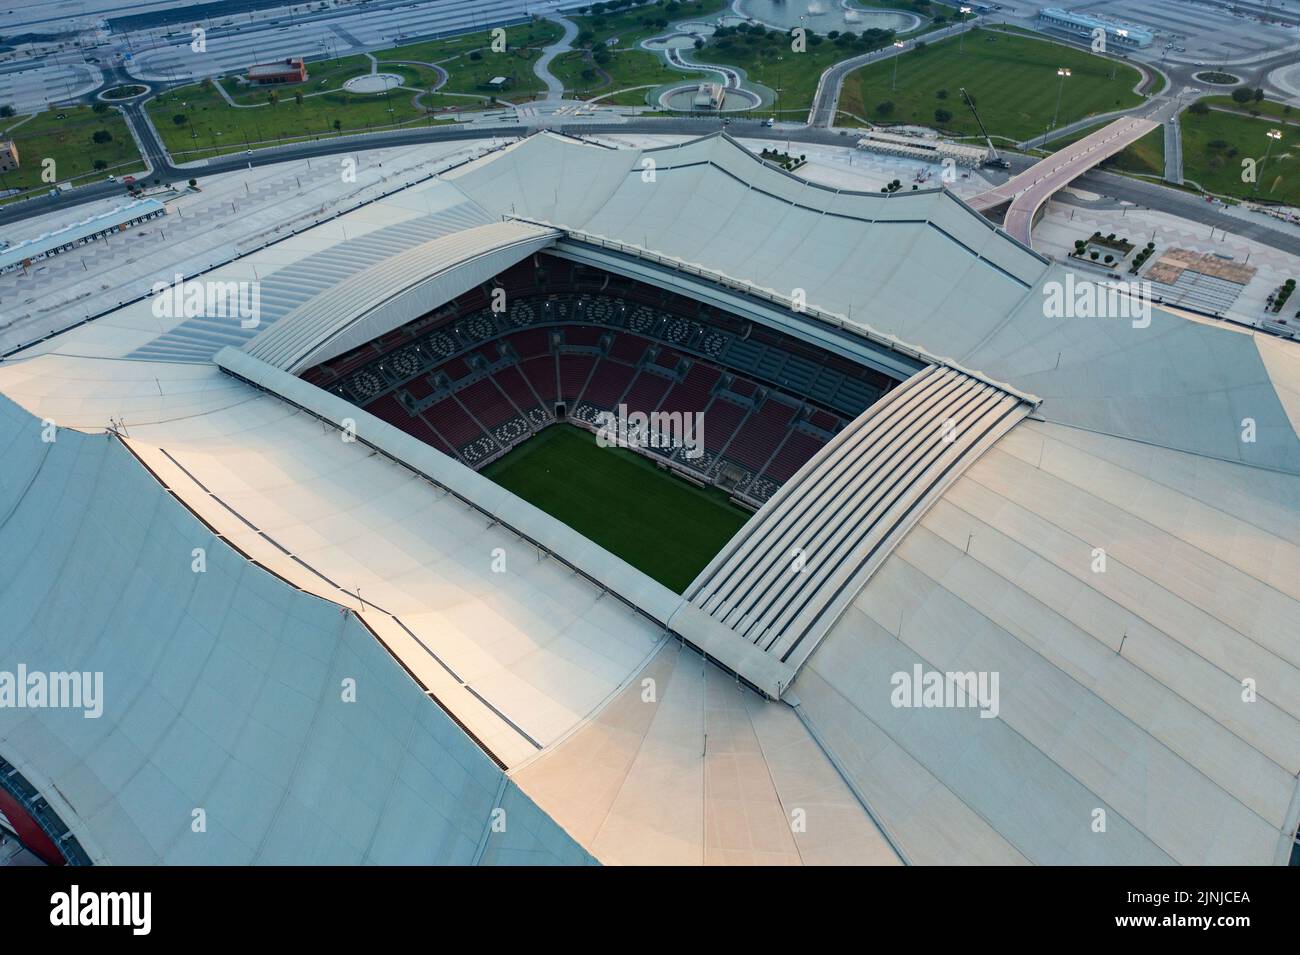 Doha. 12th Aug, 2022. Photo taken on Aug. 30, 2021 shows the aerial view of Al Bayt Stadium which will host the 2022 FIFA World Cup matches in Doha, Qatar. Credit: Xinhua/Alamy Live News Stock Photo